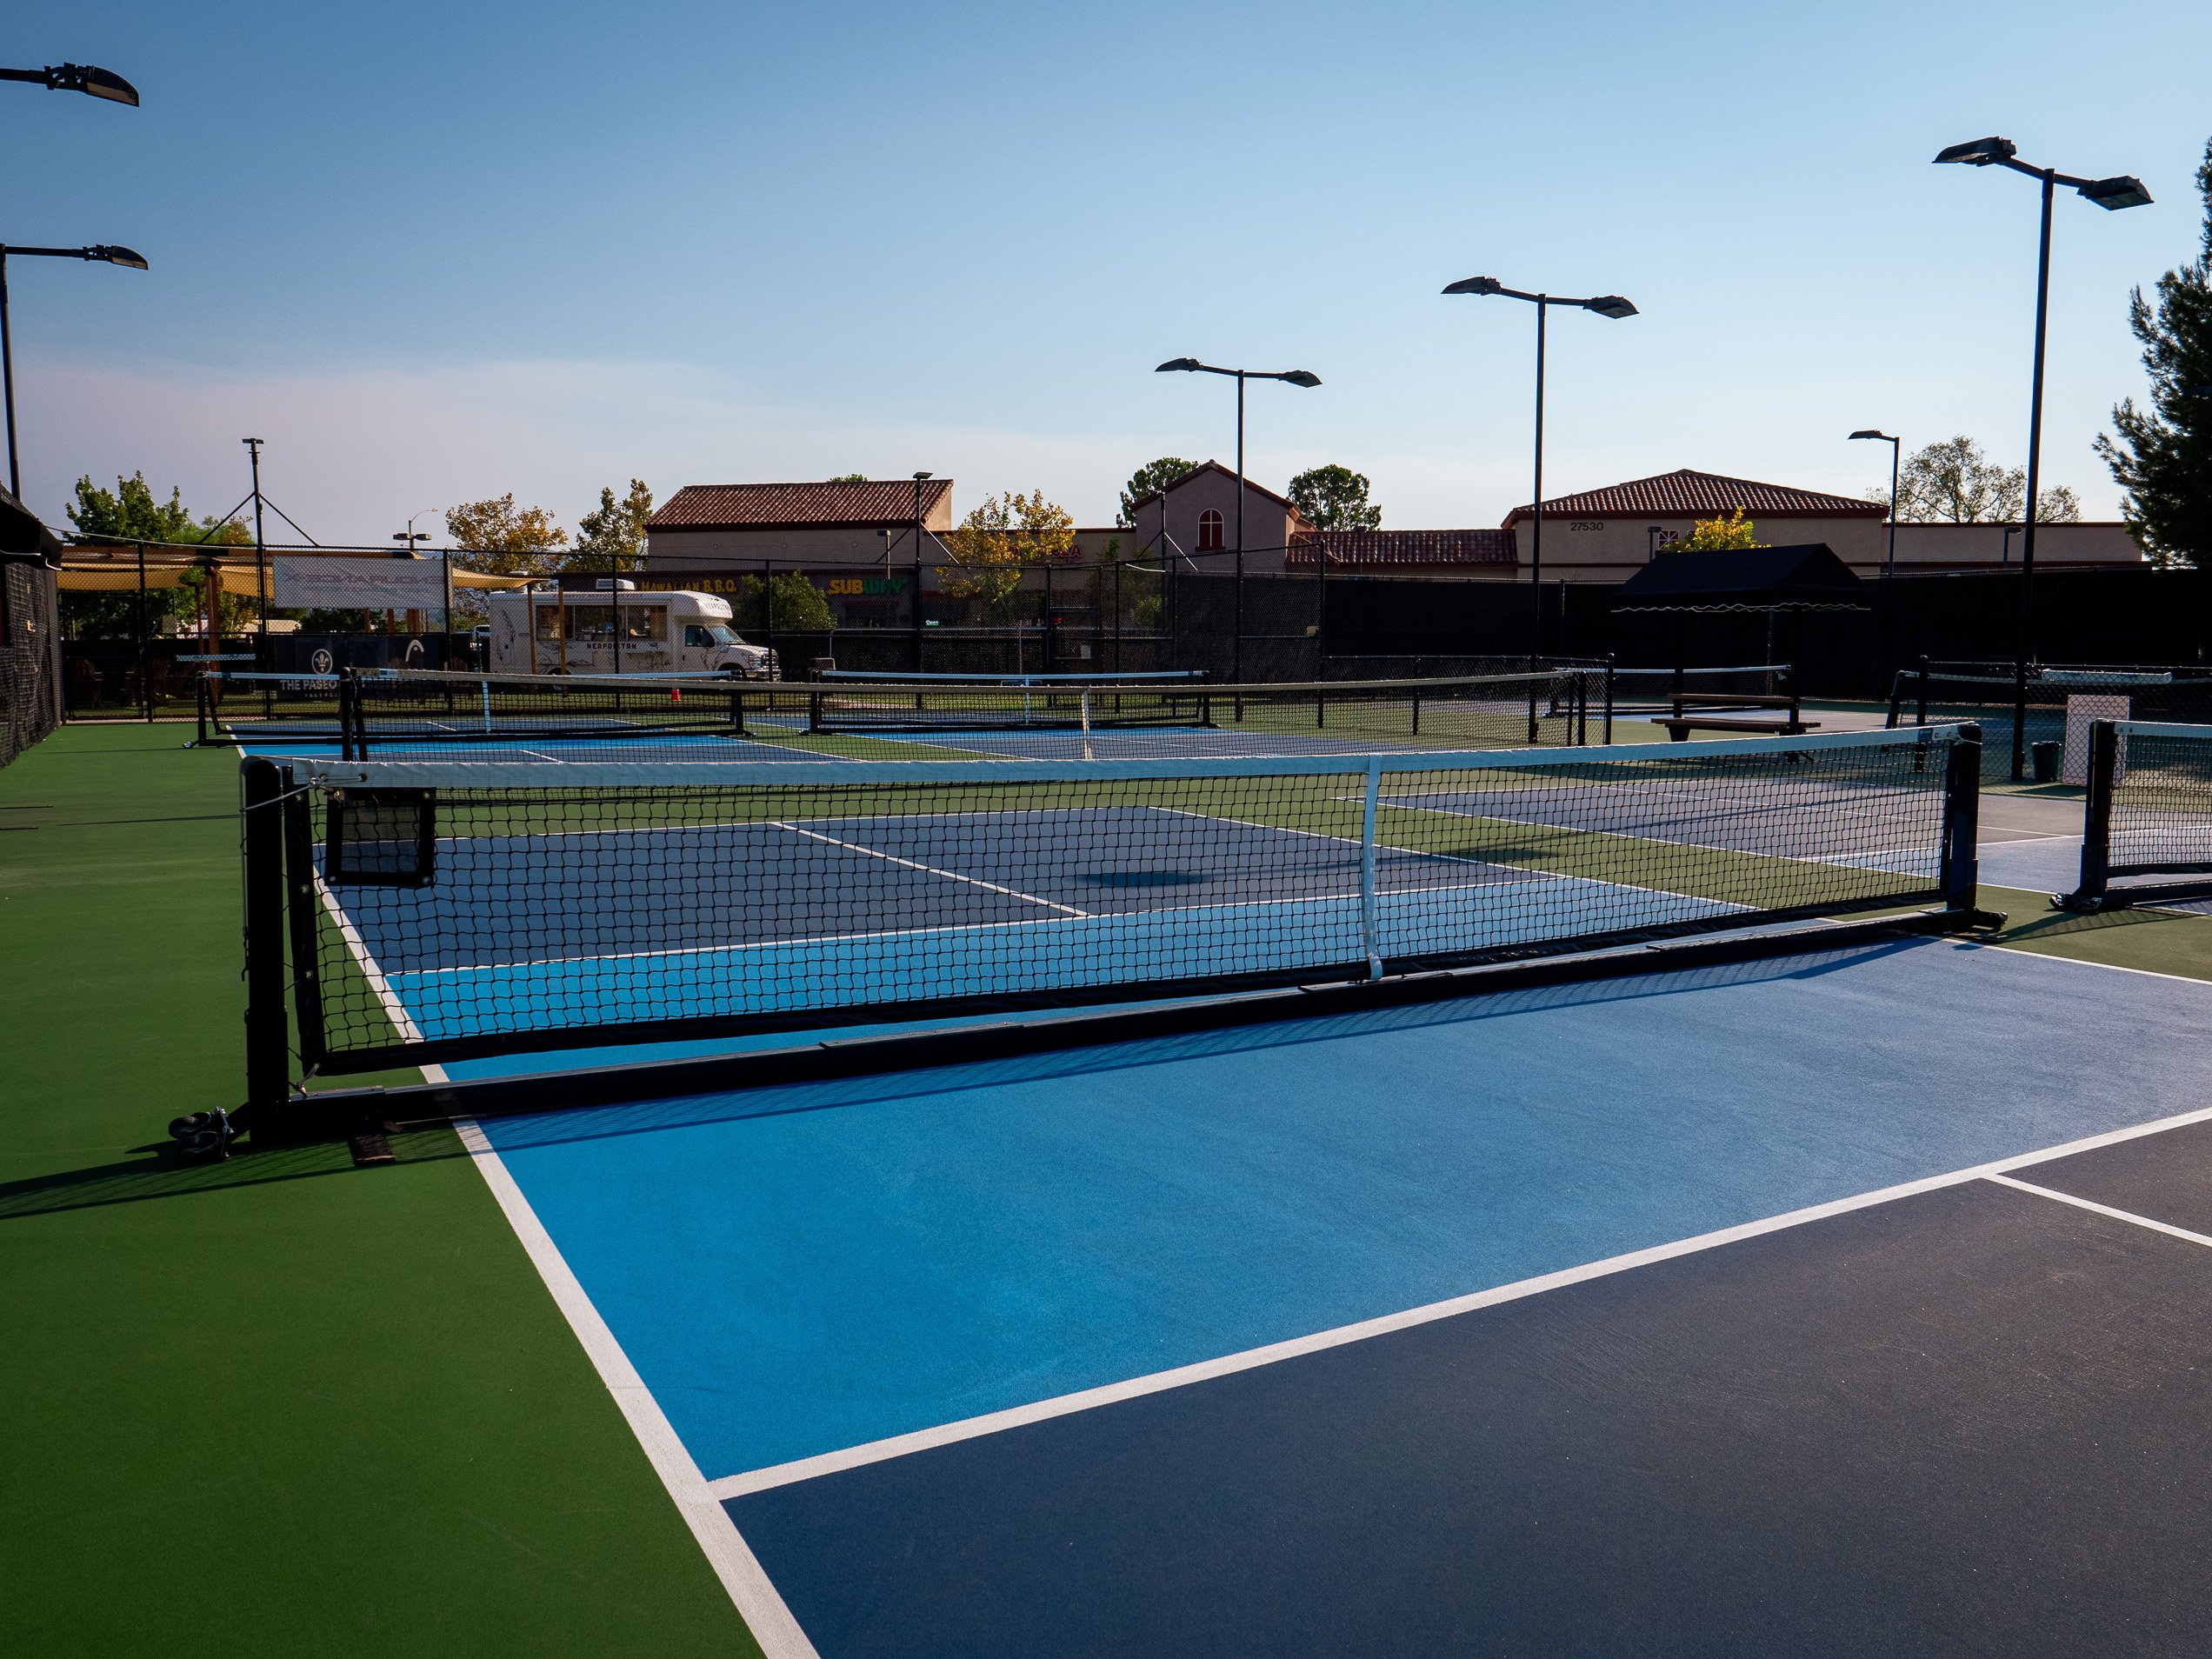 What new tennis drills are happening at the Paseo Club?